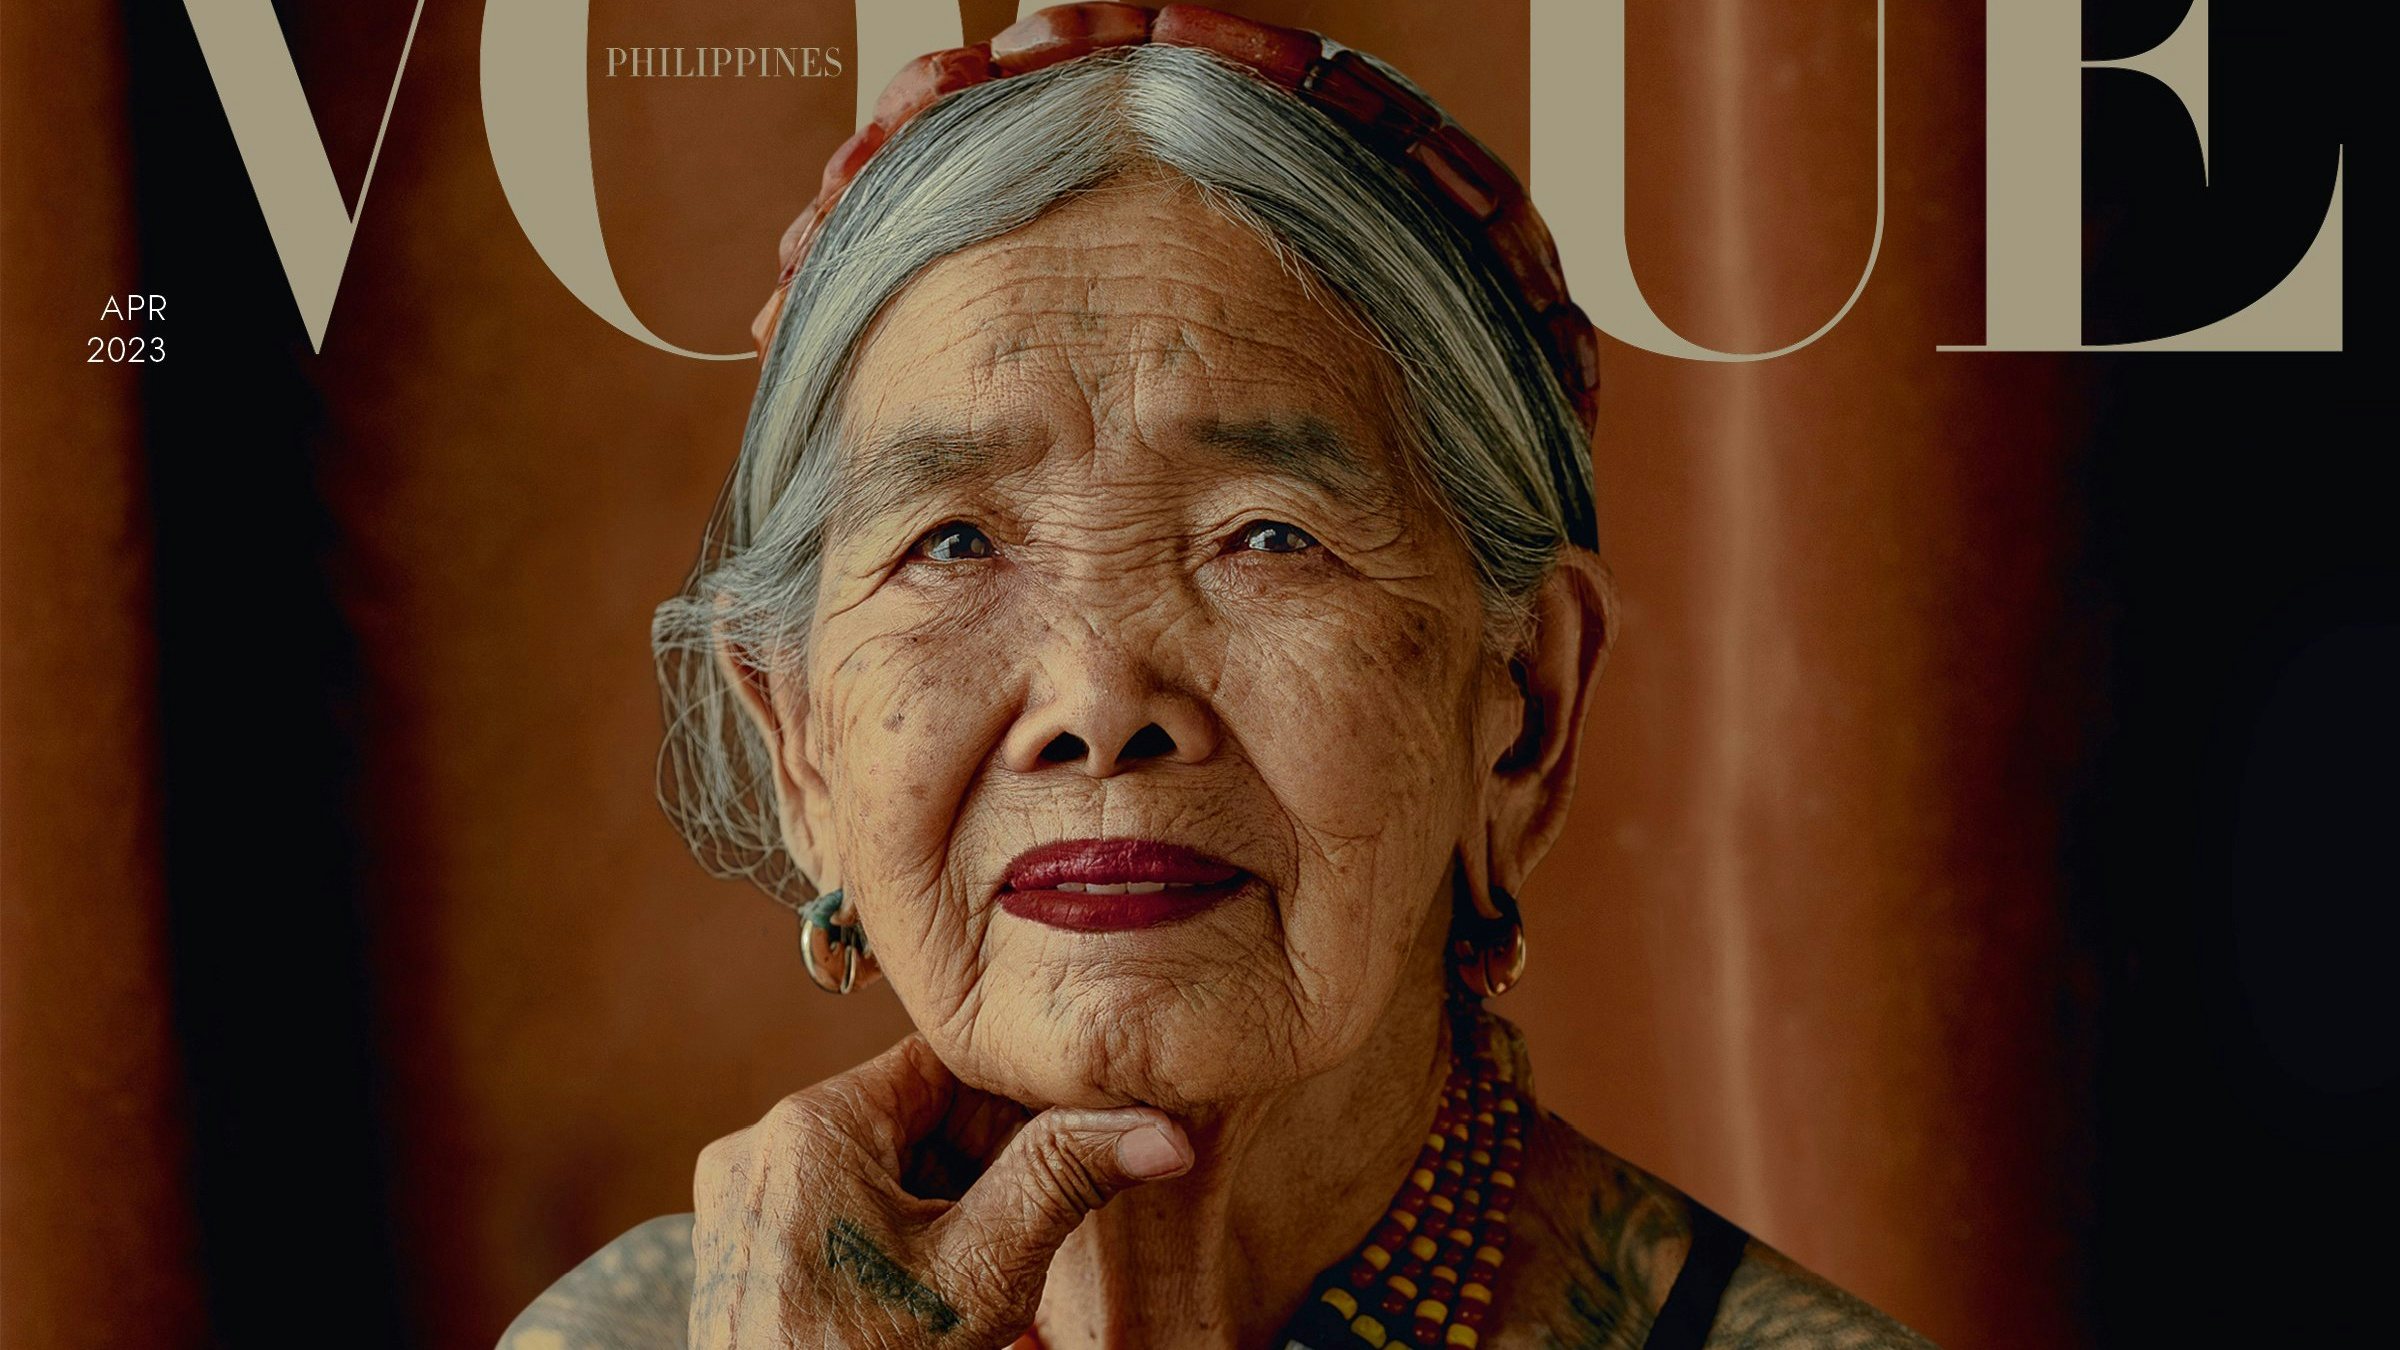 Fashion is exalting women in their 60s and beyond. But it’ll take more than a few high-profile campaigns and covers to shake fashion’s obsession with youth. Photo: Artu Nepomuceno/Vogue Philippines 